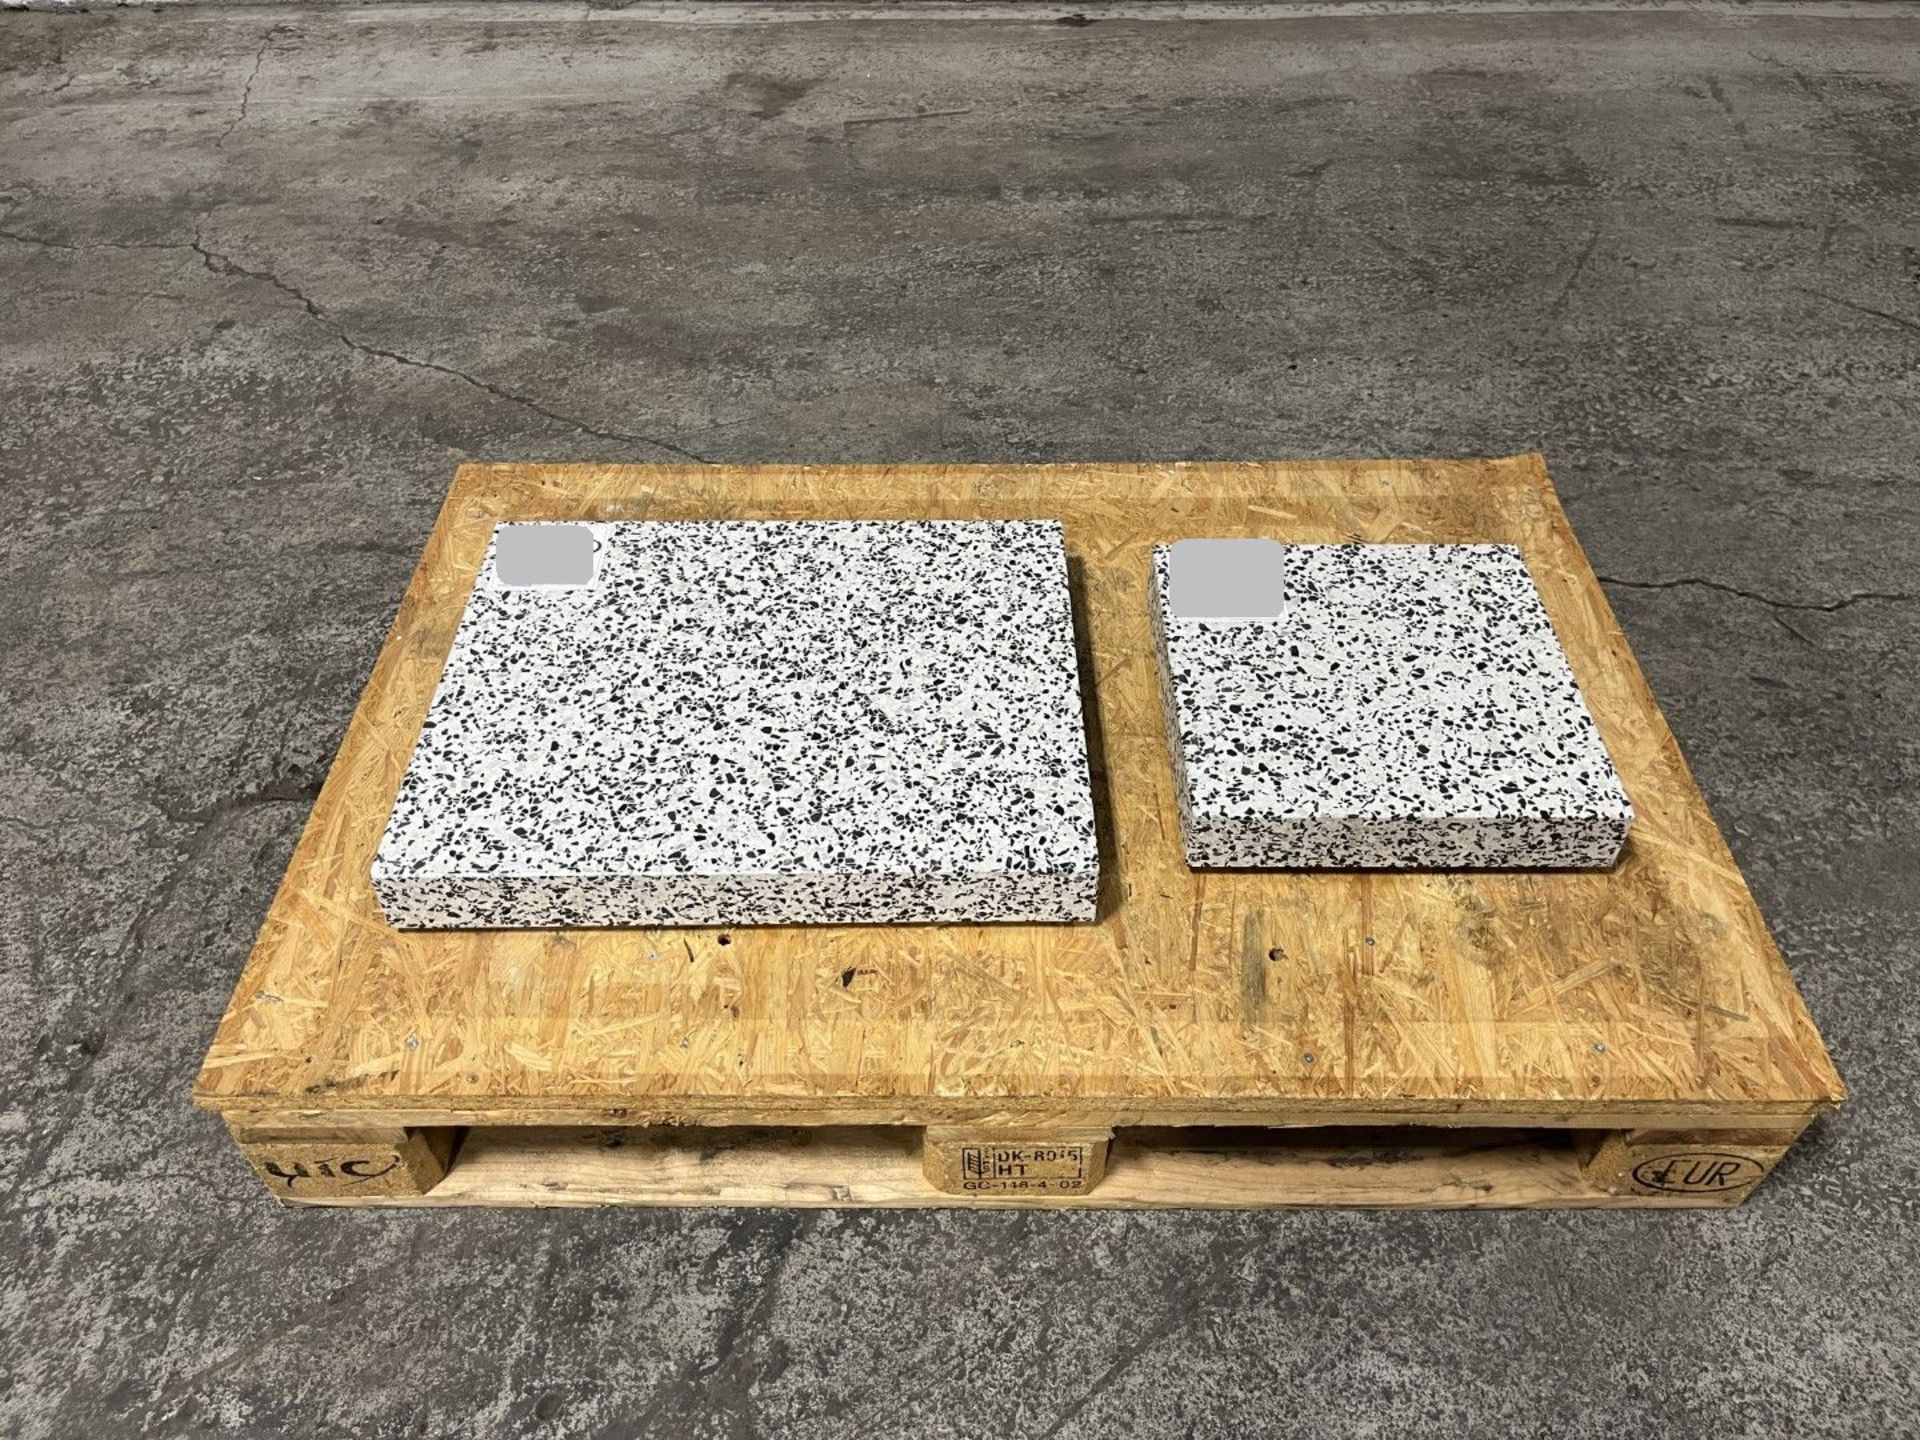 Marble Stability slabs, (1) measures 22" x 18" and (1) measures 13.5" x 13.5". (TAG # 1190194) Ships